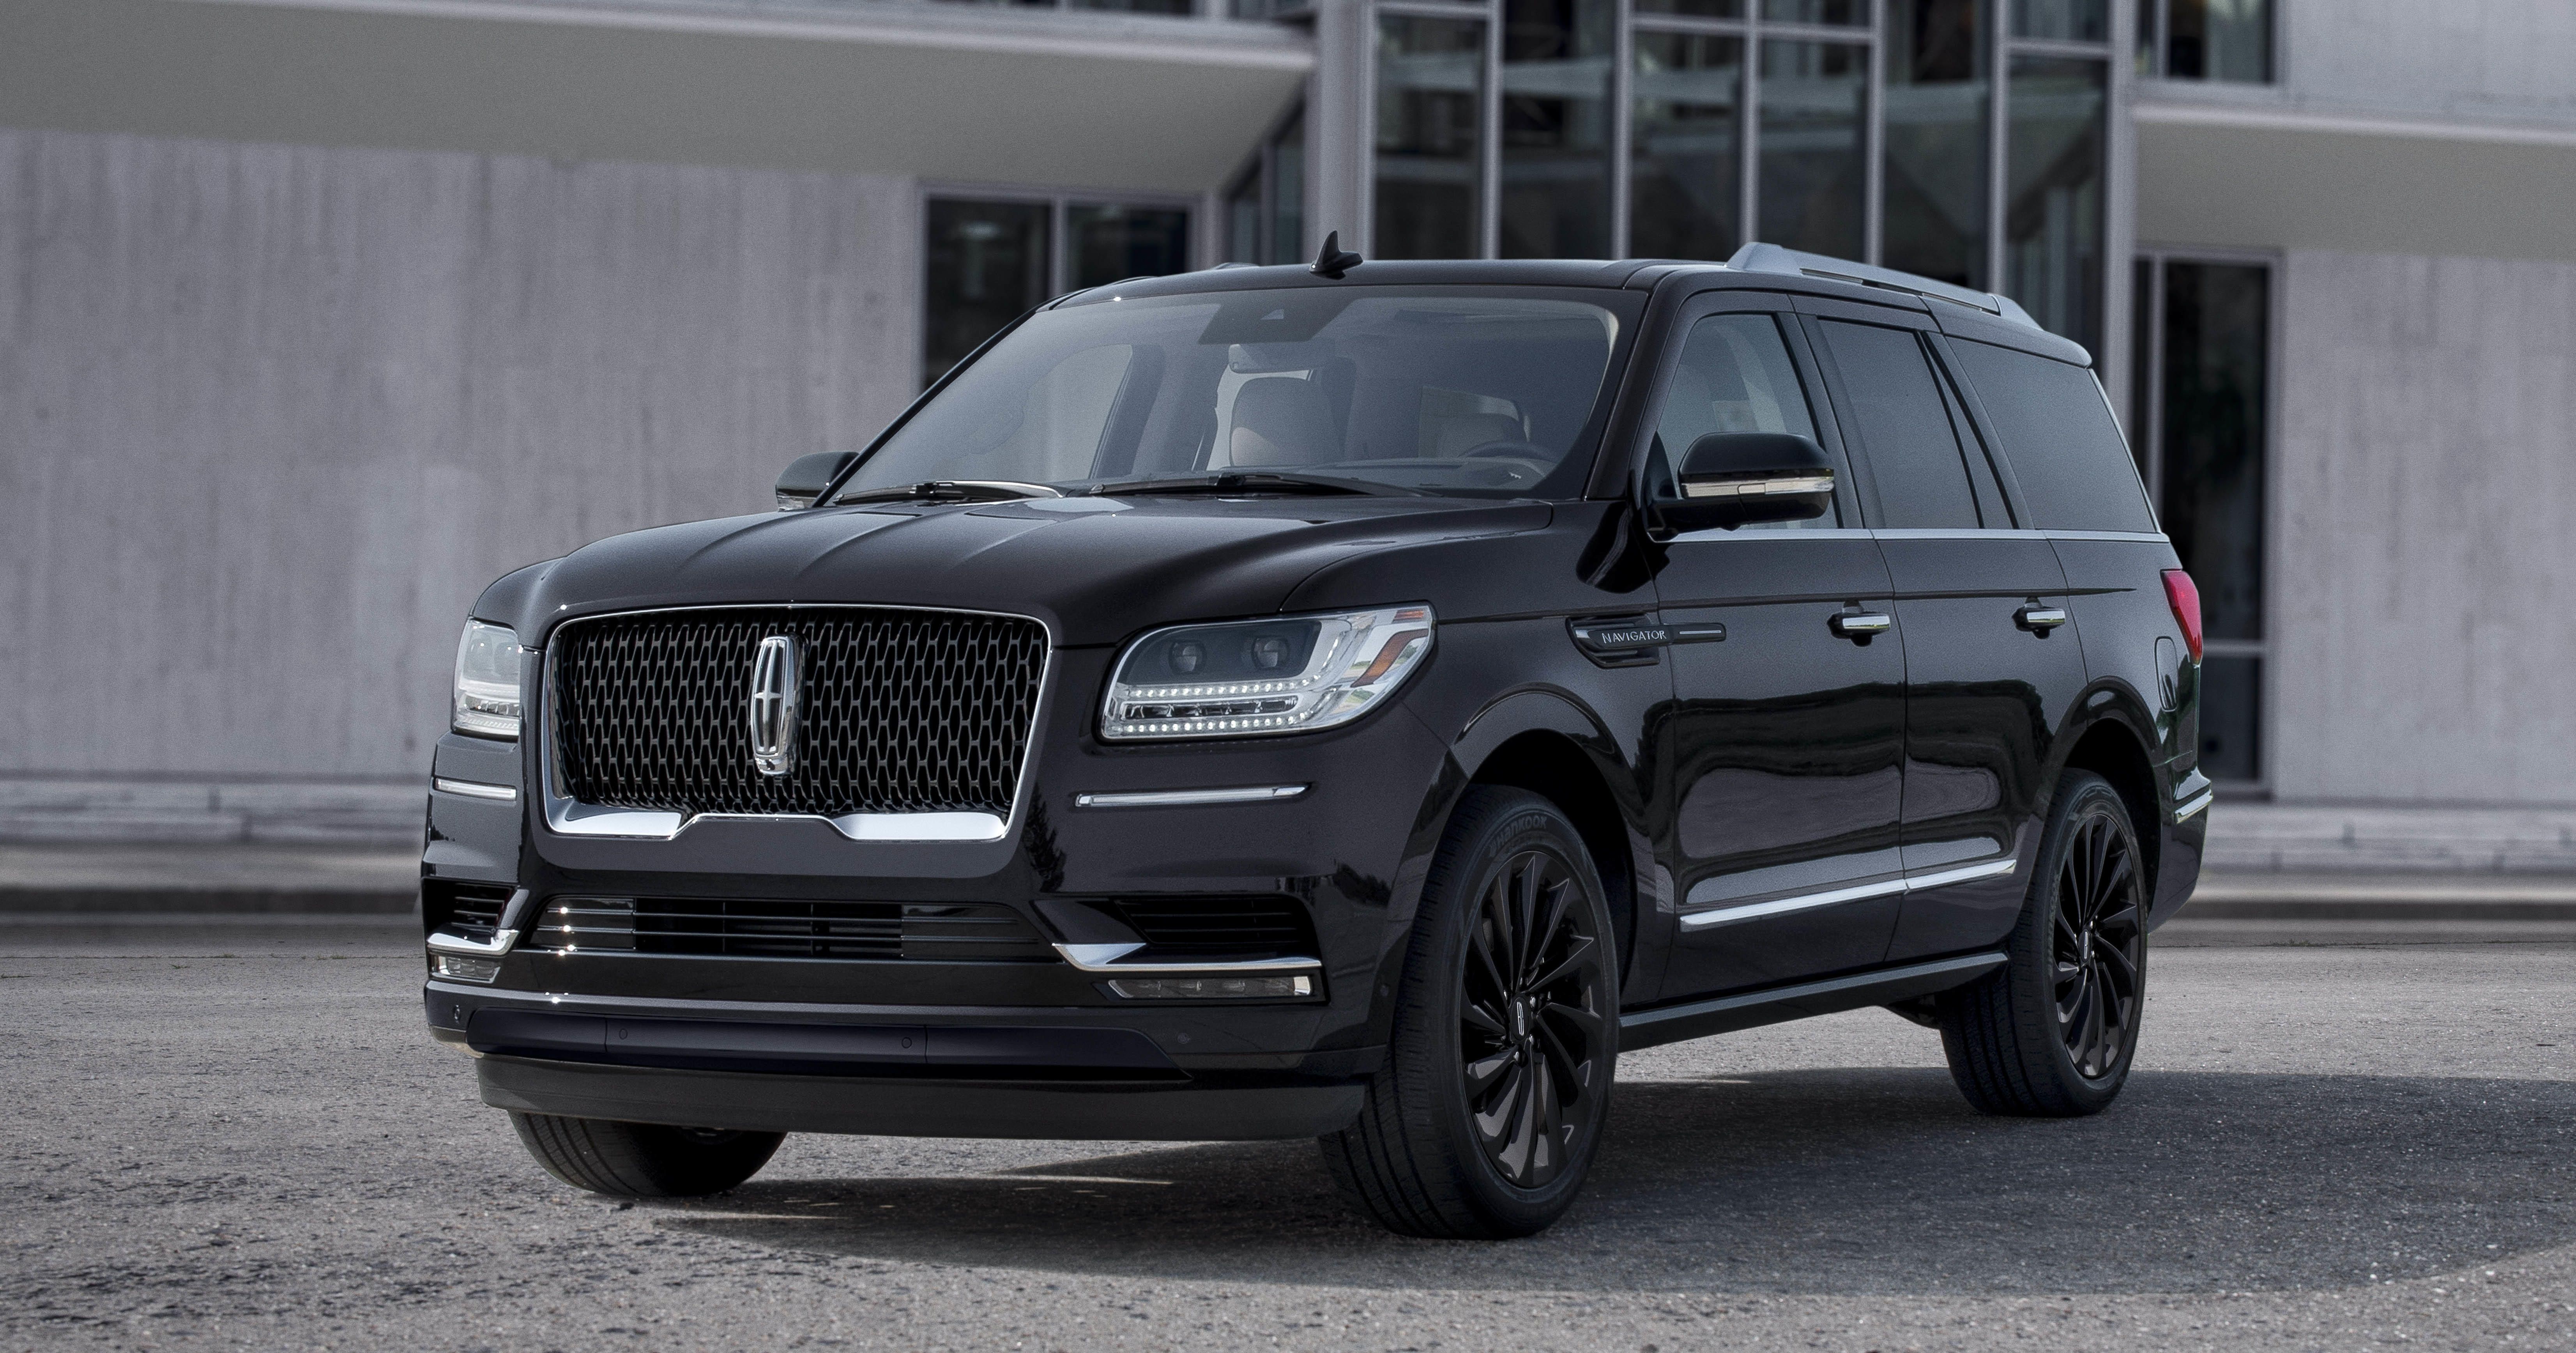 Lincoln Aviator exterior specifications